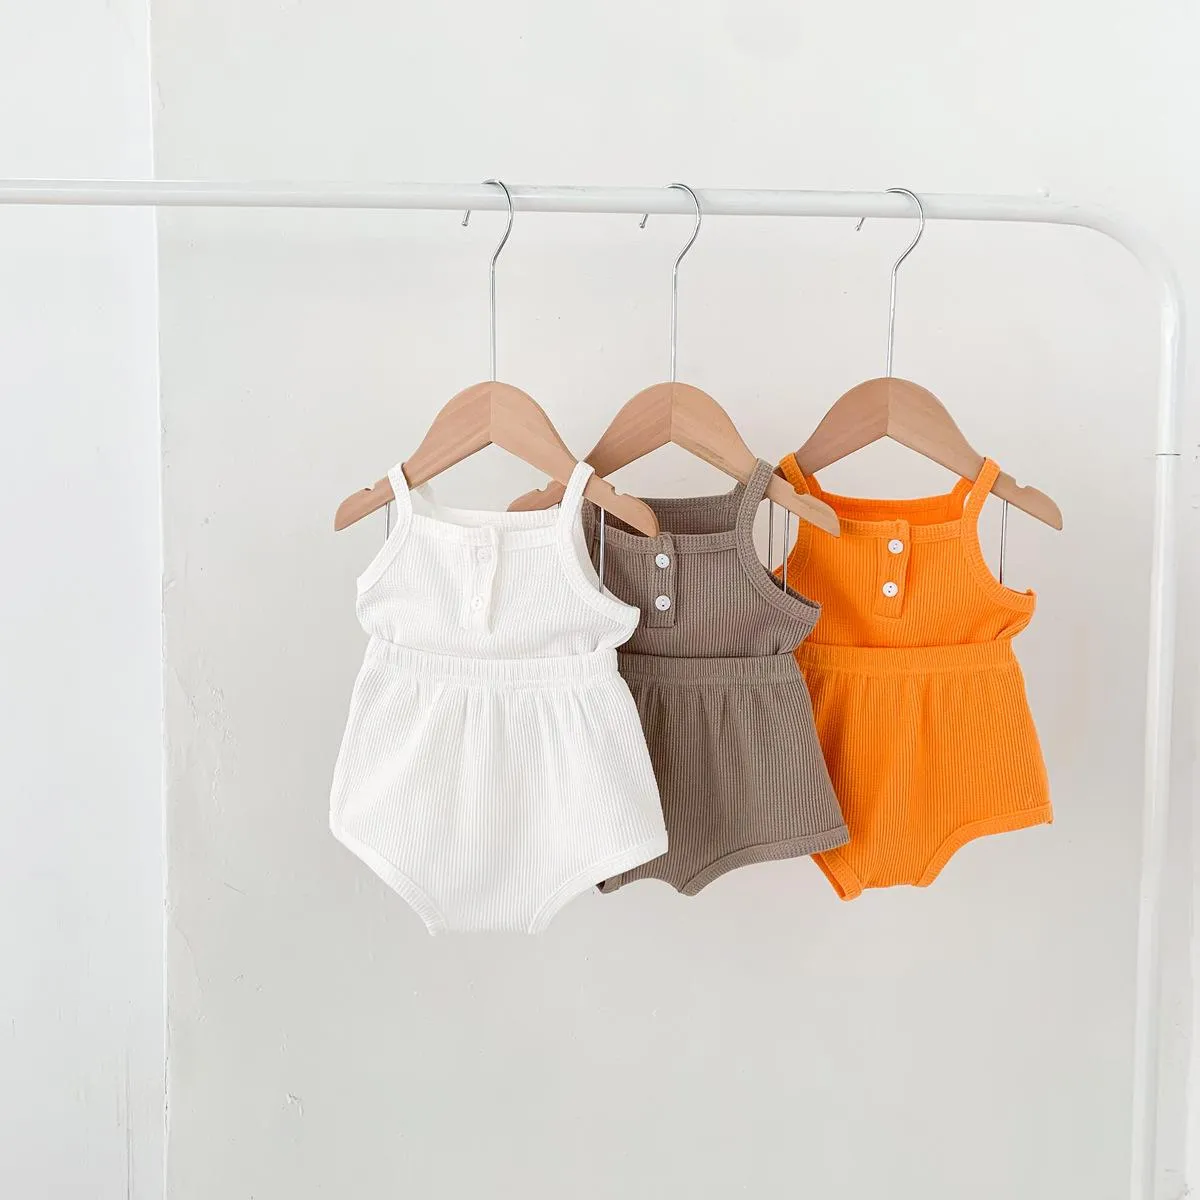 2022 Australia Korean US INS Toddler Clothing Sets Waffle Cotton Pretty Soft Short Sleeve Tanks with Hot Shorts 2pcs Newborn Outfits